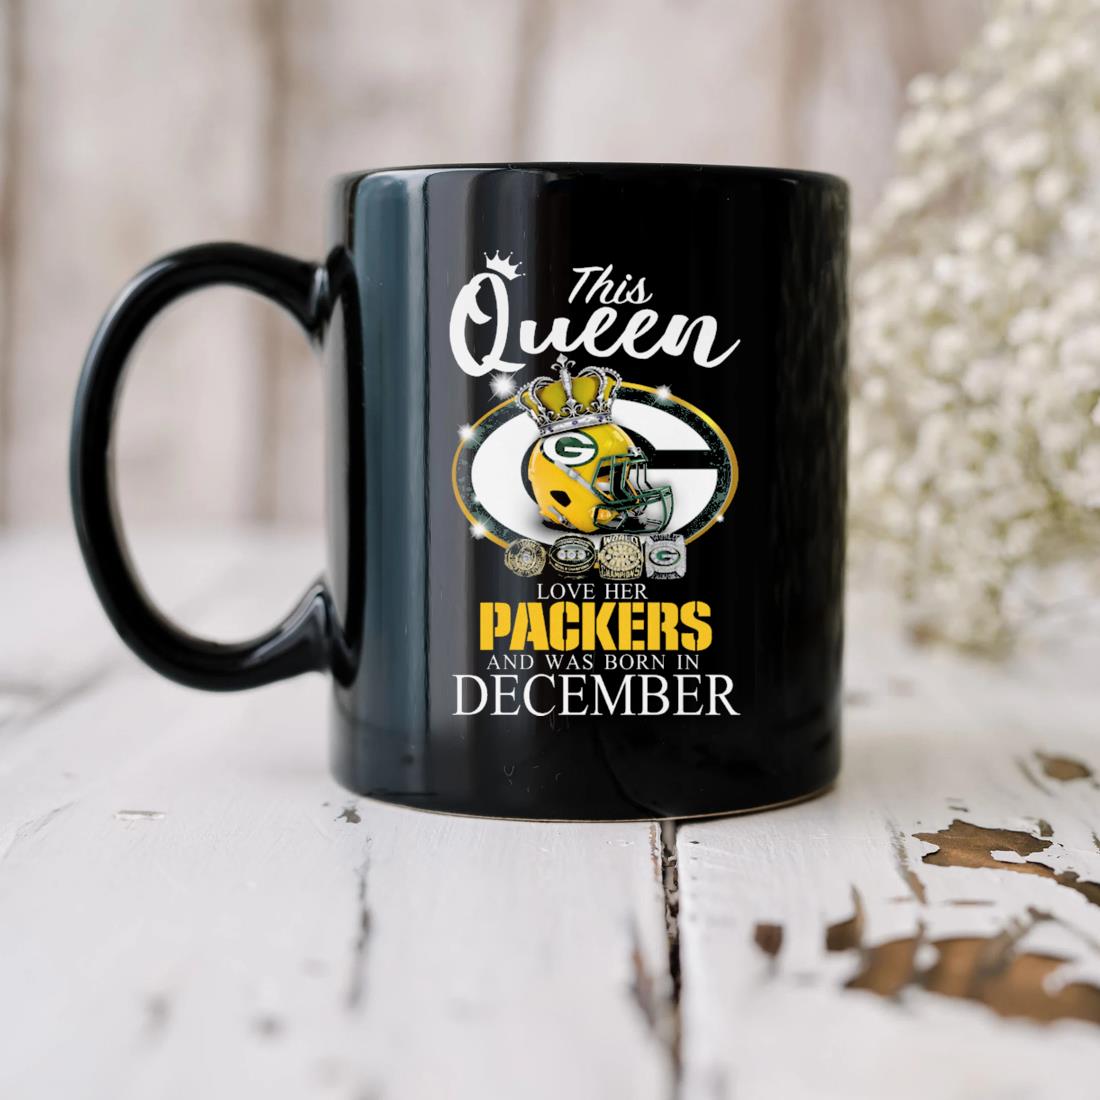 This Queen Love Her Packers And Was Born In December Mug